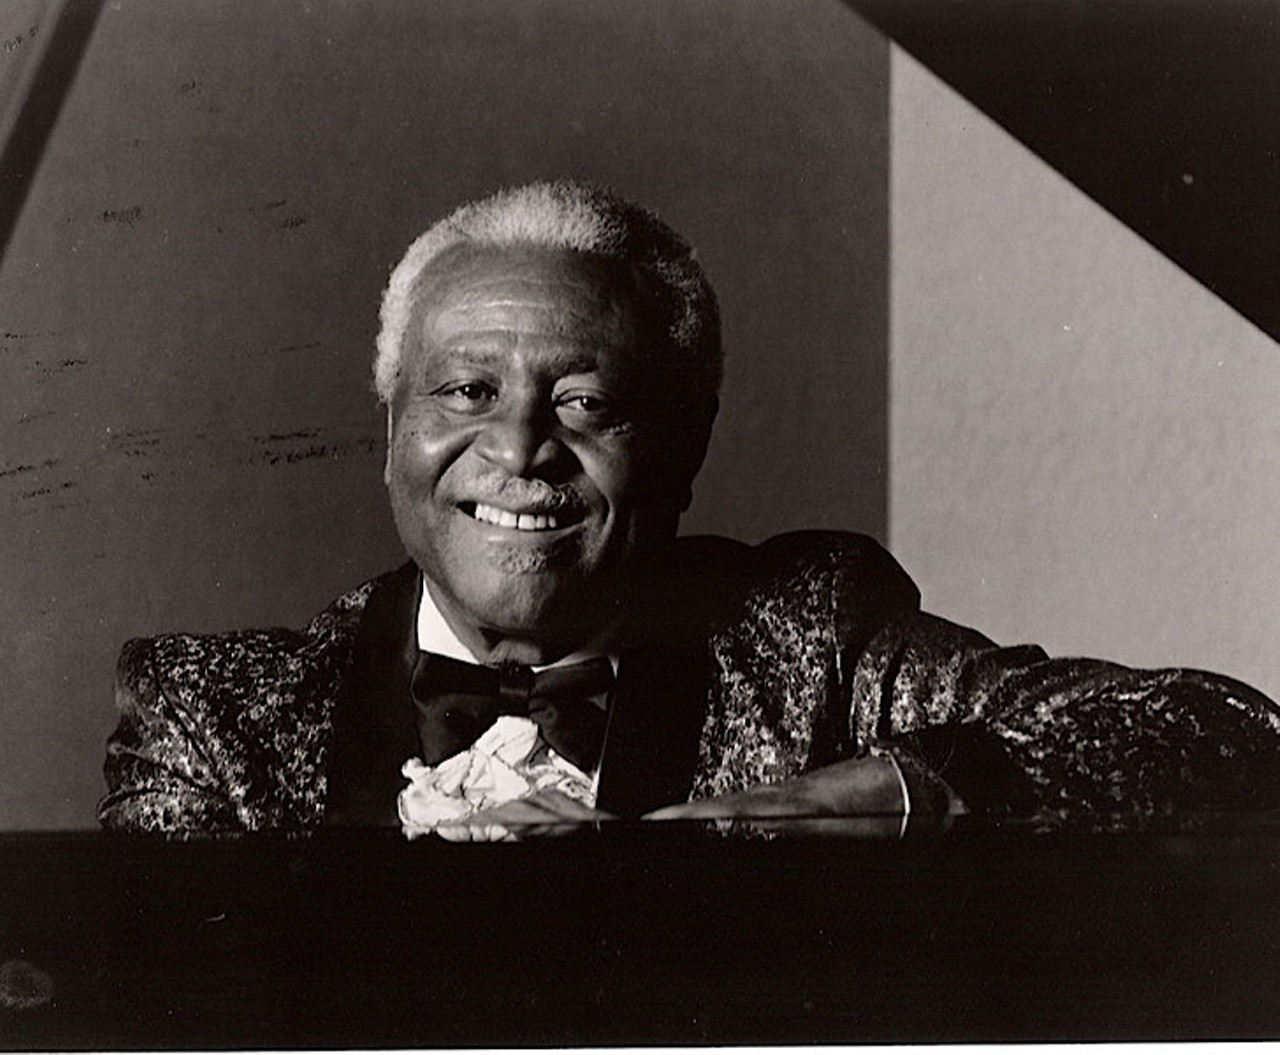 Al Downing
Not to be confused with the Al Downing that gave up Hank Aaron&#146;s record-breaking 715th home run, Tampa&#146;s Al Downing was a member of the Tuskegee Airmen, and eventually became the first African-American to perform in the St. Petersburg Symphony Orchestra. Downing passed away in 2000 from heart failure. 
Photo Jpieniazek via Wikimedia Commons